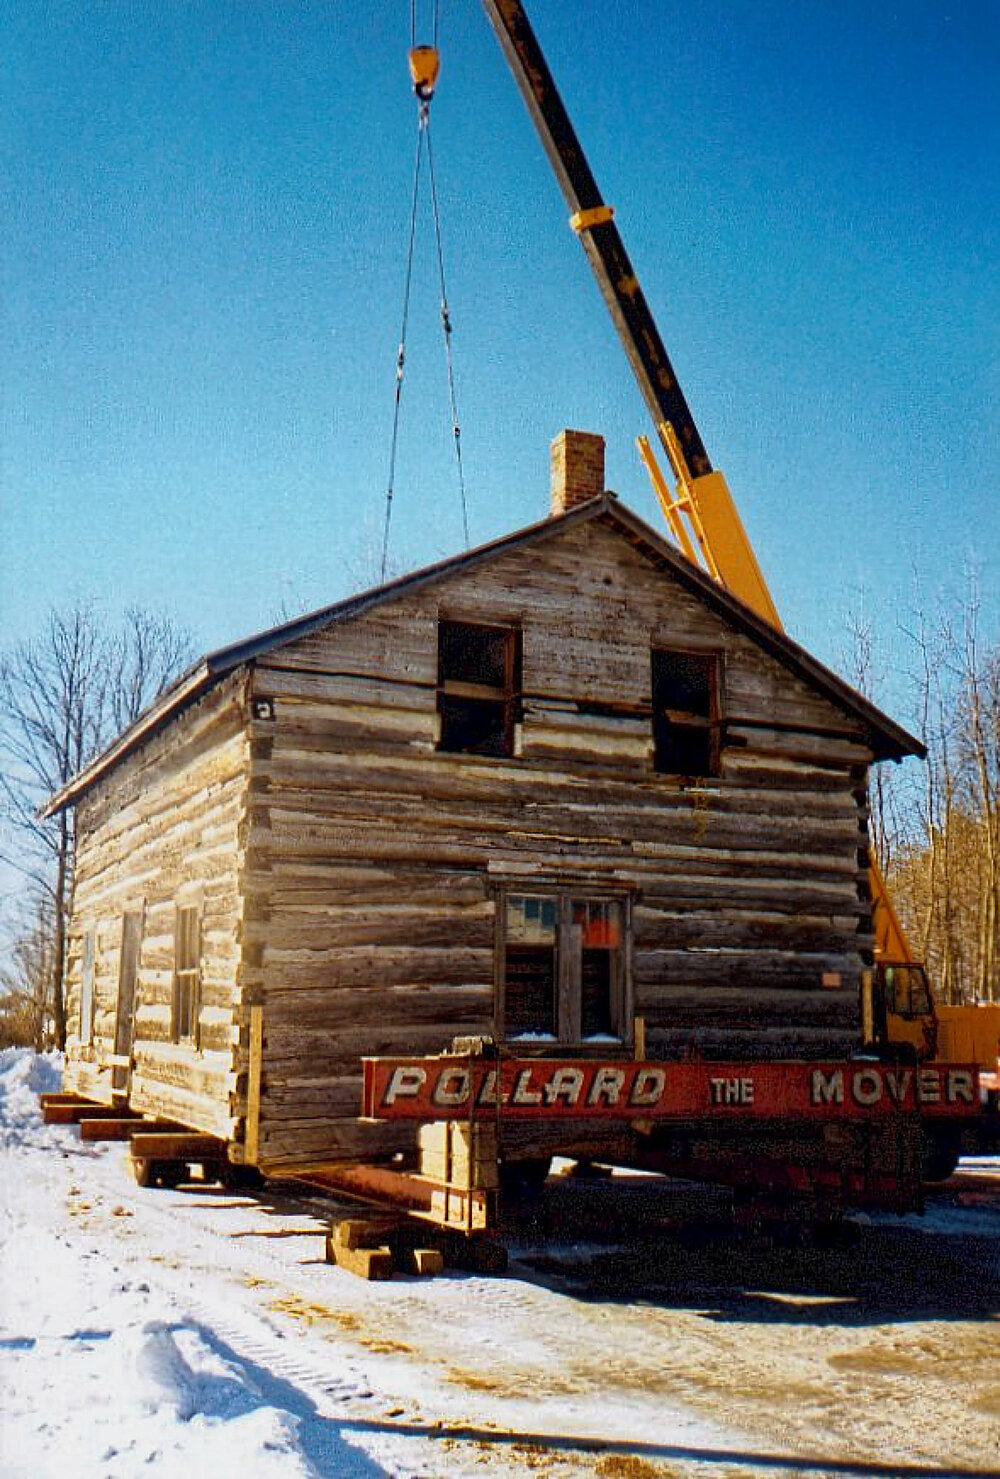 Moving The Wray House at Kawartha Settlers' Village